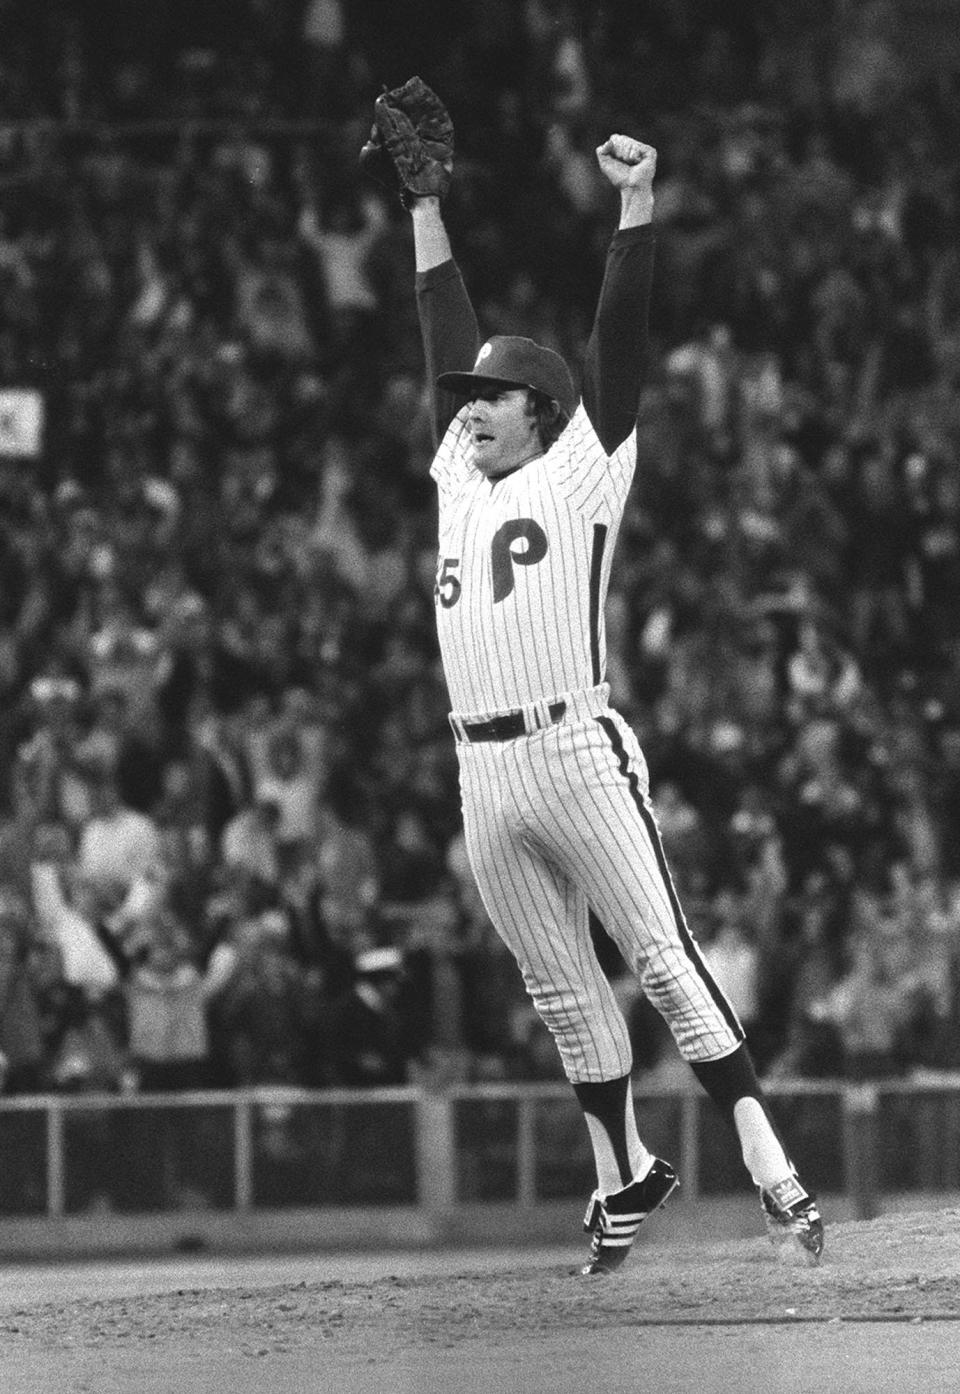 Philadelphia Phillies pitcher Tug McGraw leaps of the mound after striking out the last Kansas City Royals batter in the ninth inning as the Phillies won the first game of the World Series, 7-6, in Philadelphia, Pa., on Oct. 14, 1980.  (AP Photo)